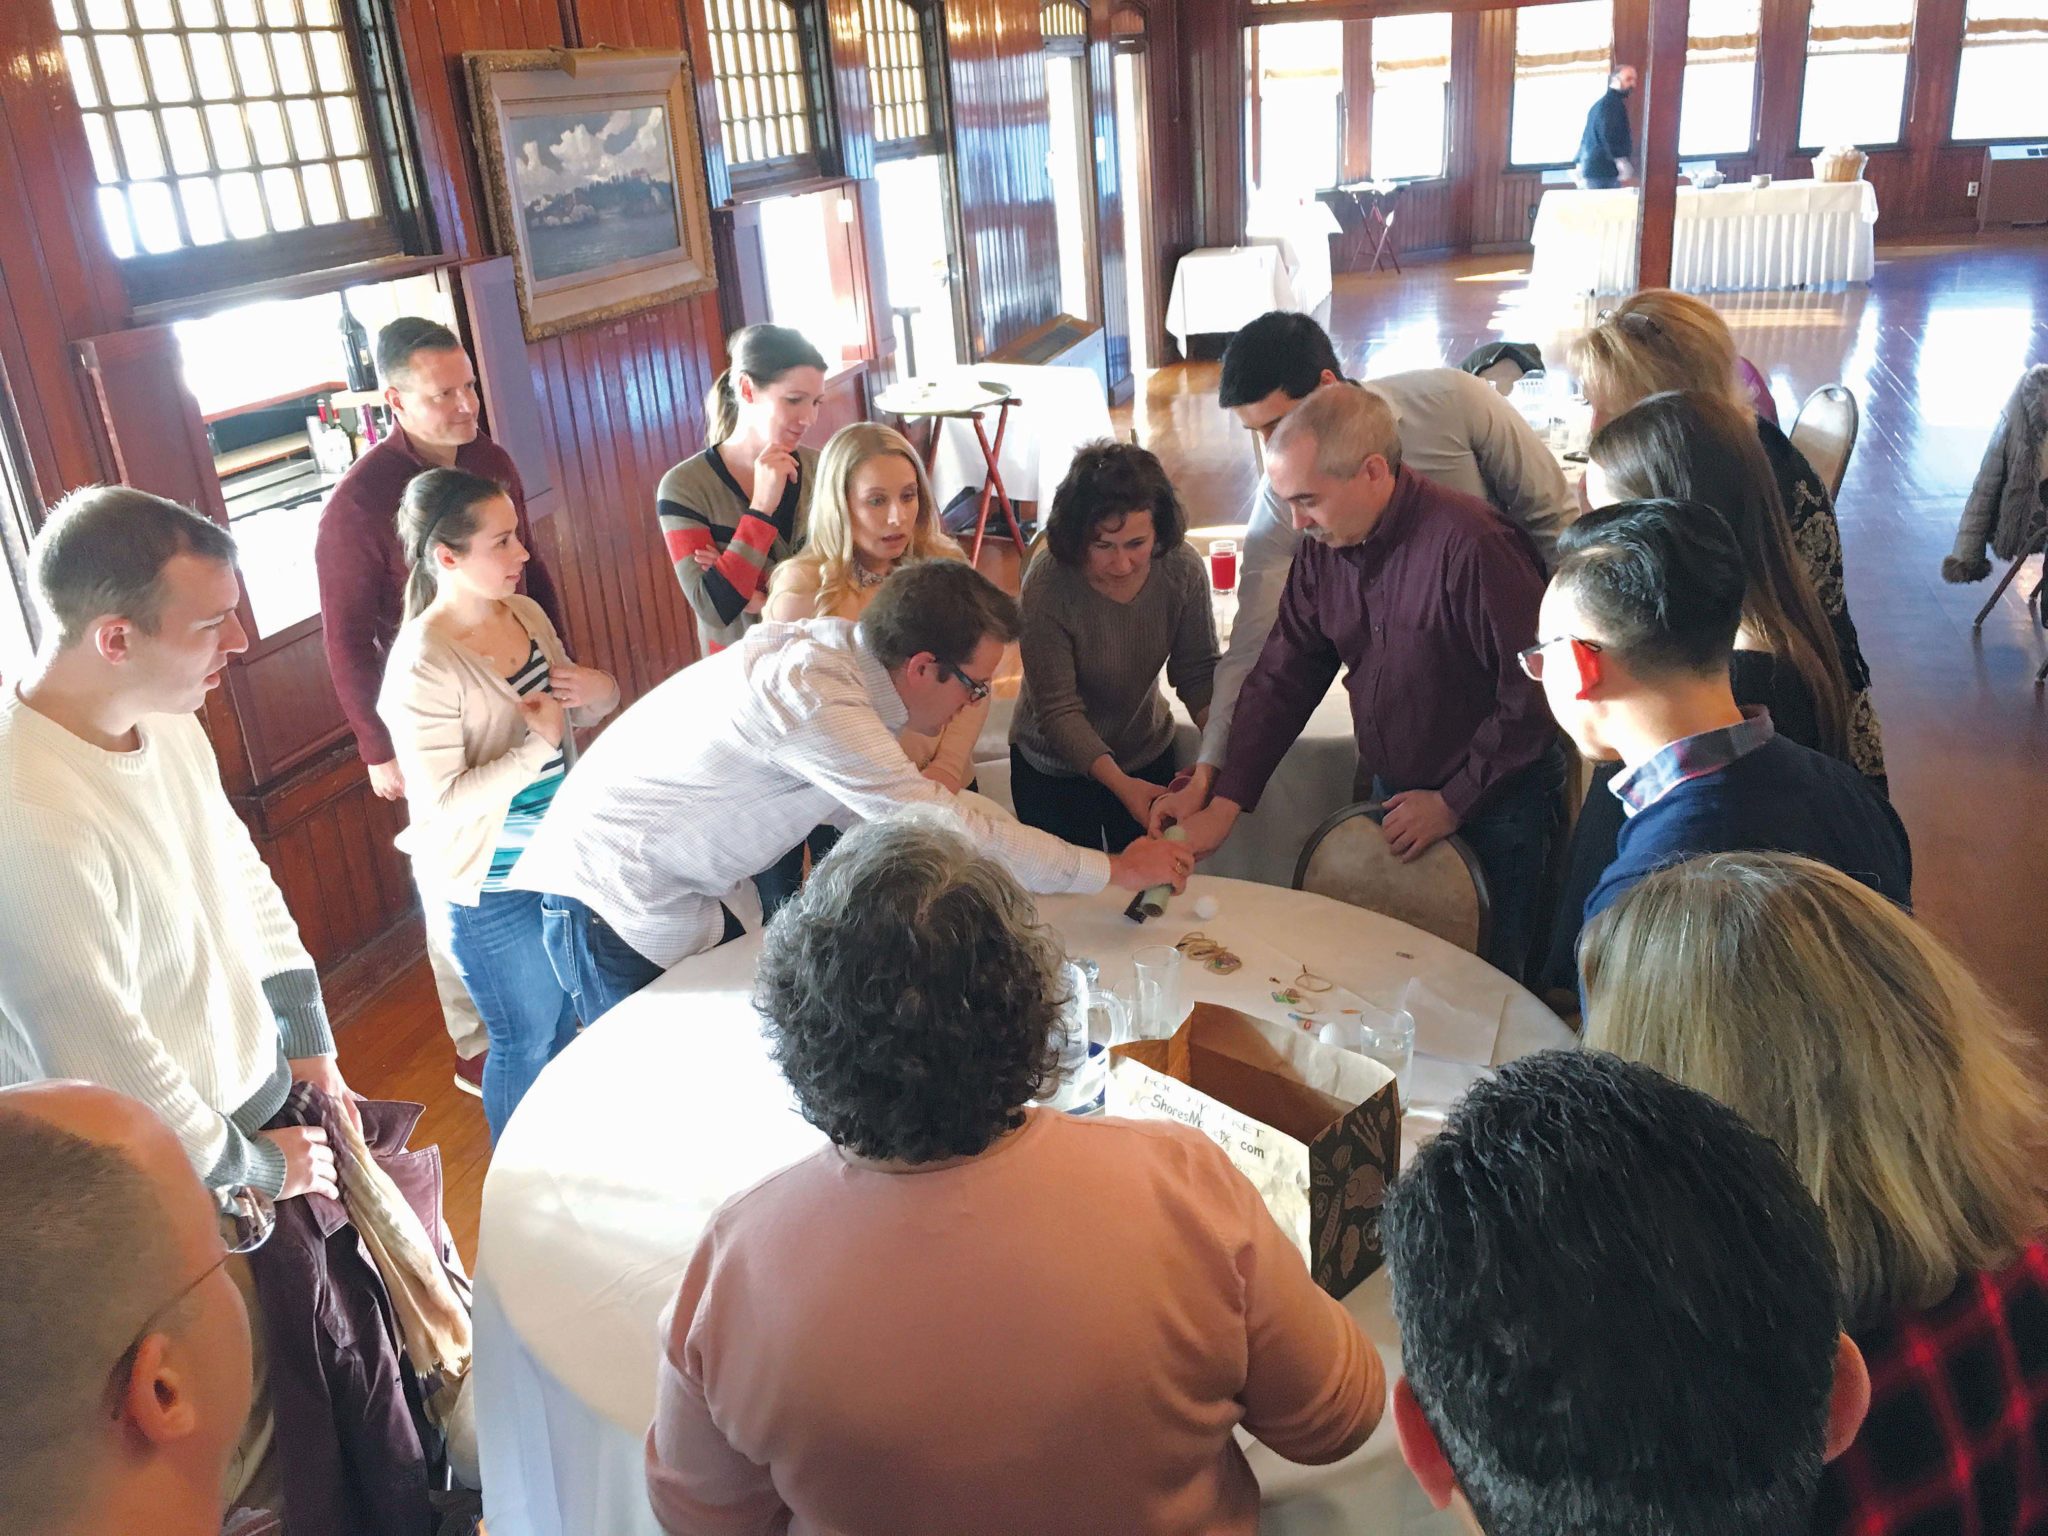 BUILDING A BETTER FIRM: Sansiveri, Kimball & Co. employees take part in team-building exercises during the company’s annual all-day retreat at the Squantum Club in East Providence. / COURTESY SANSIVERI, KIMBALL & CO.